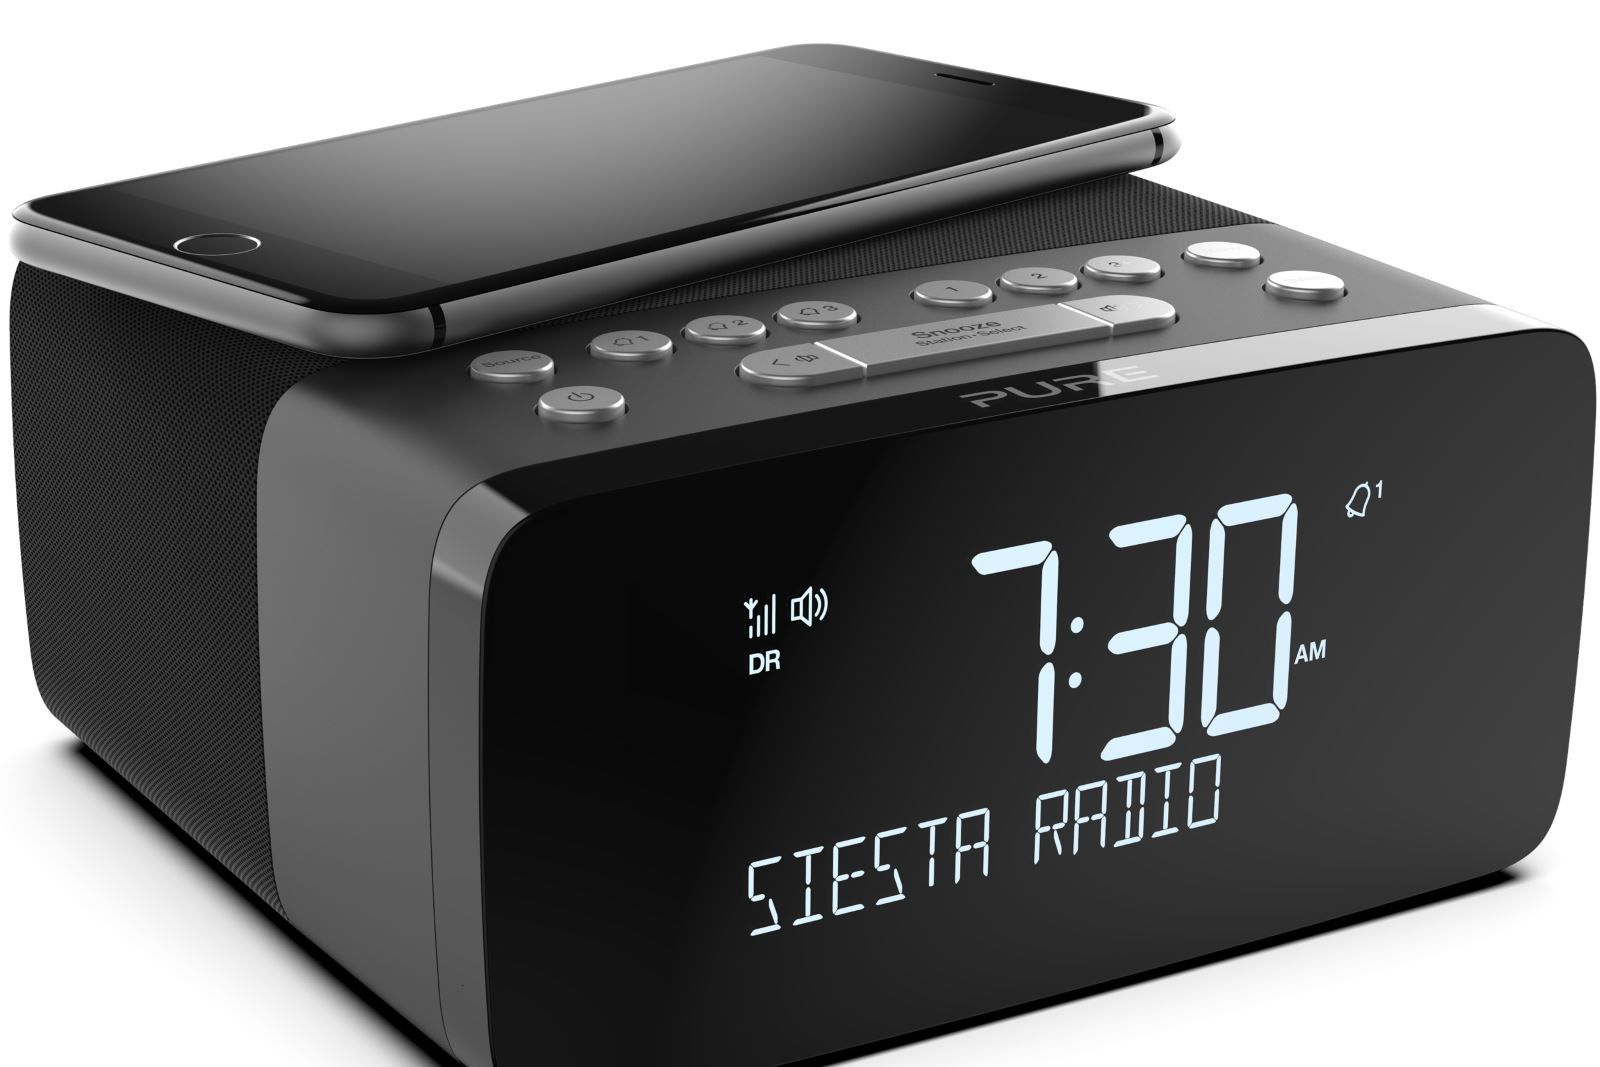 Pures new alarm clock DAB radio can wirelessly charge your phone image 1